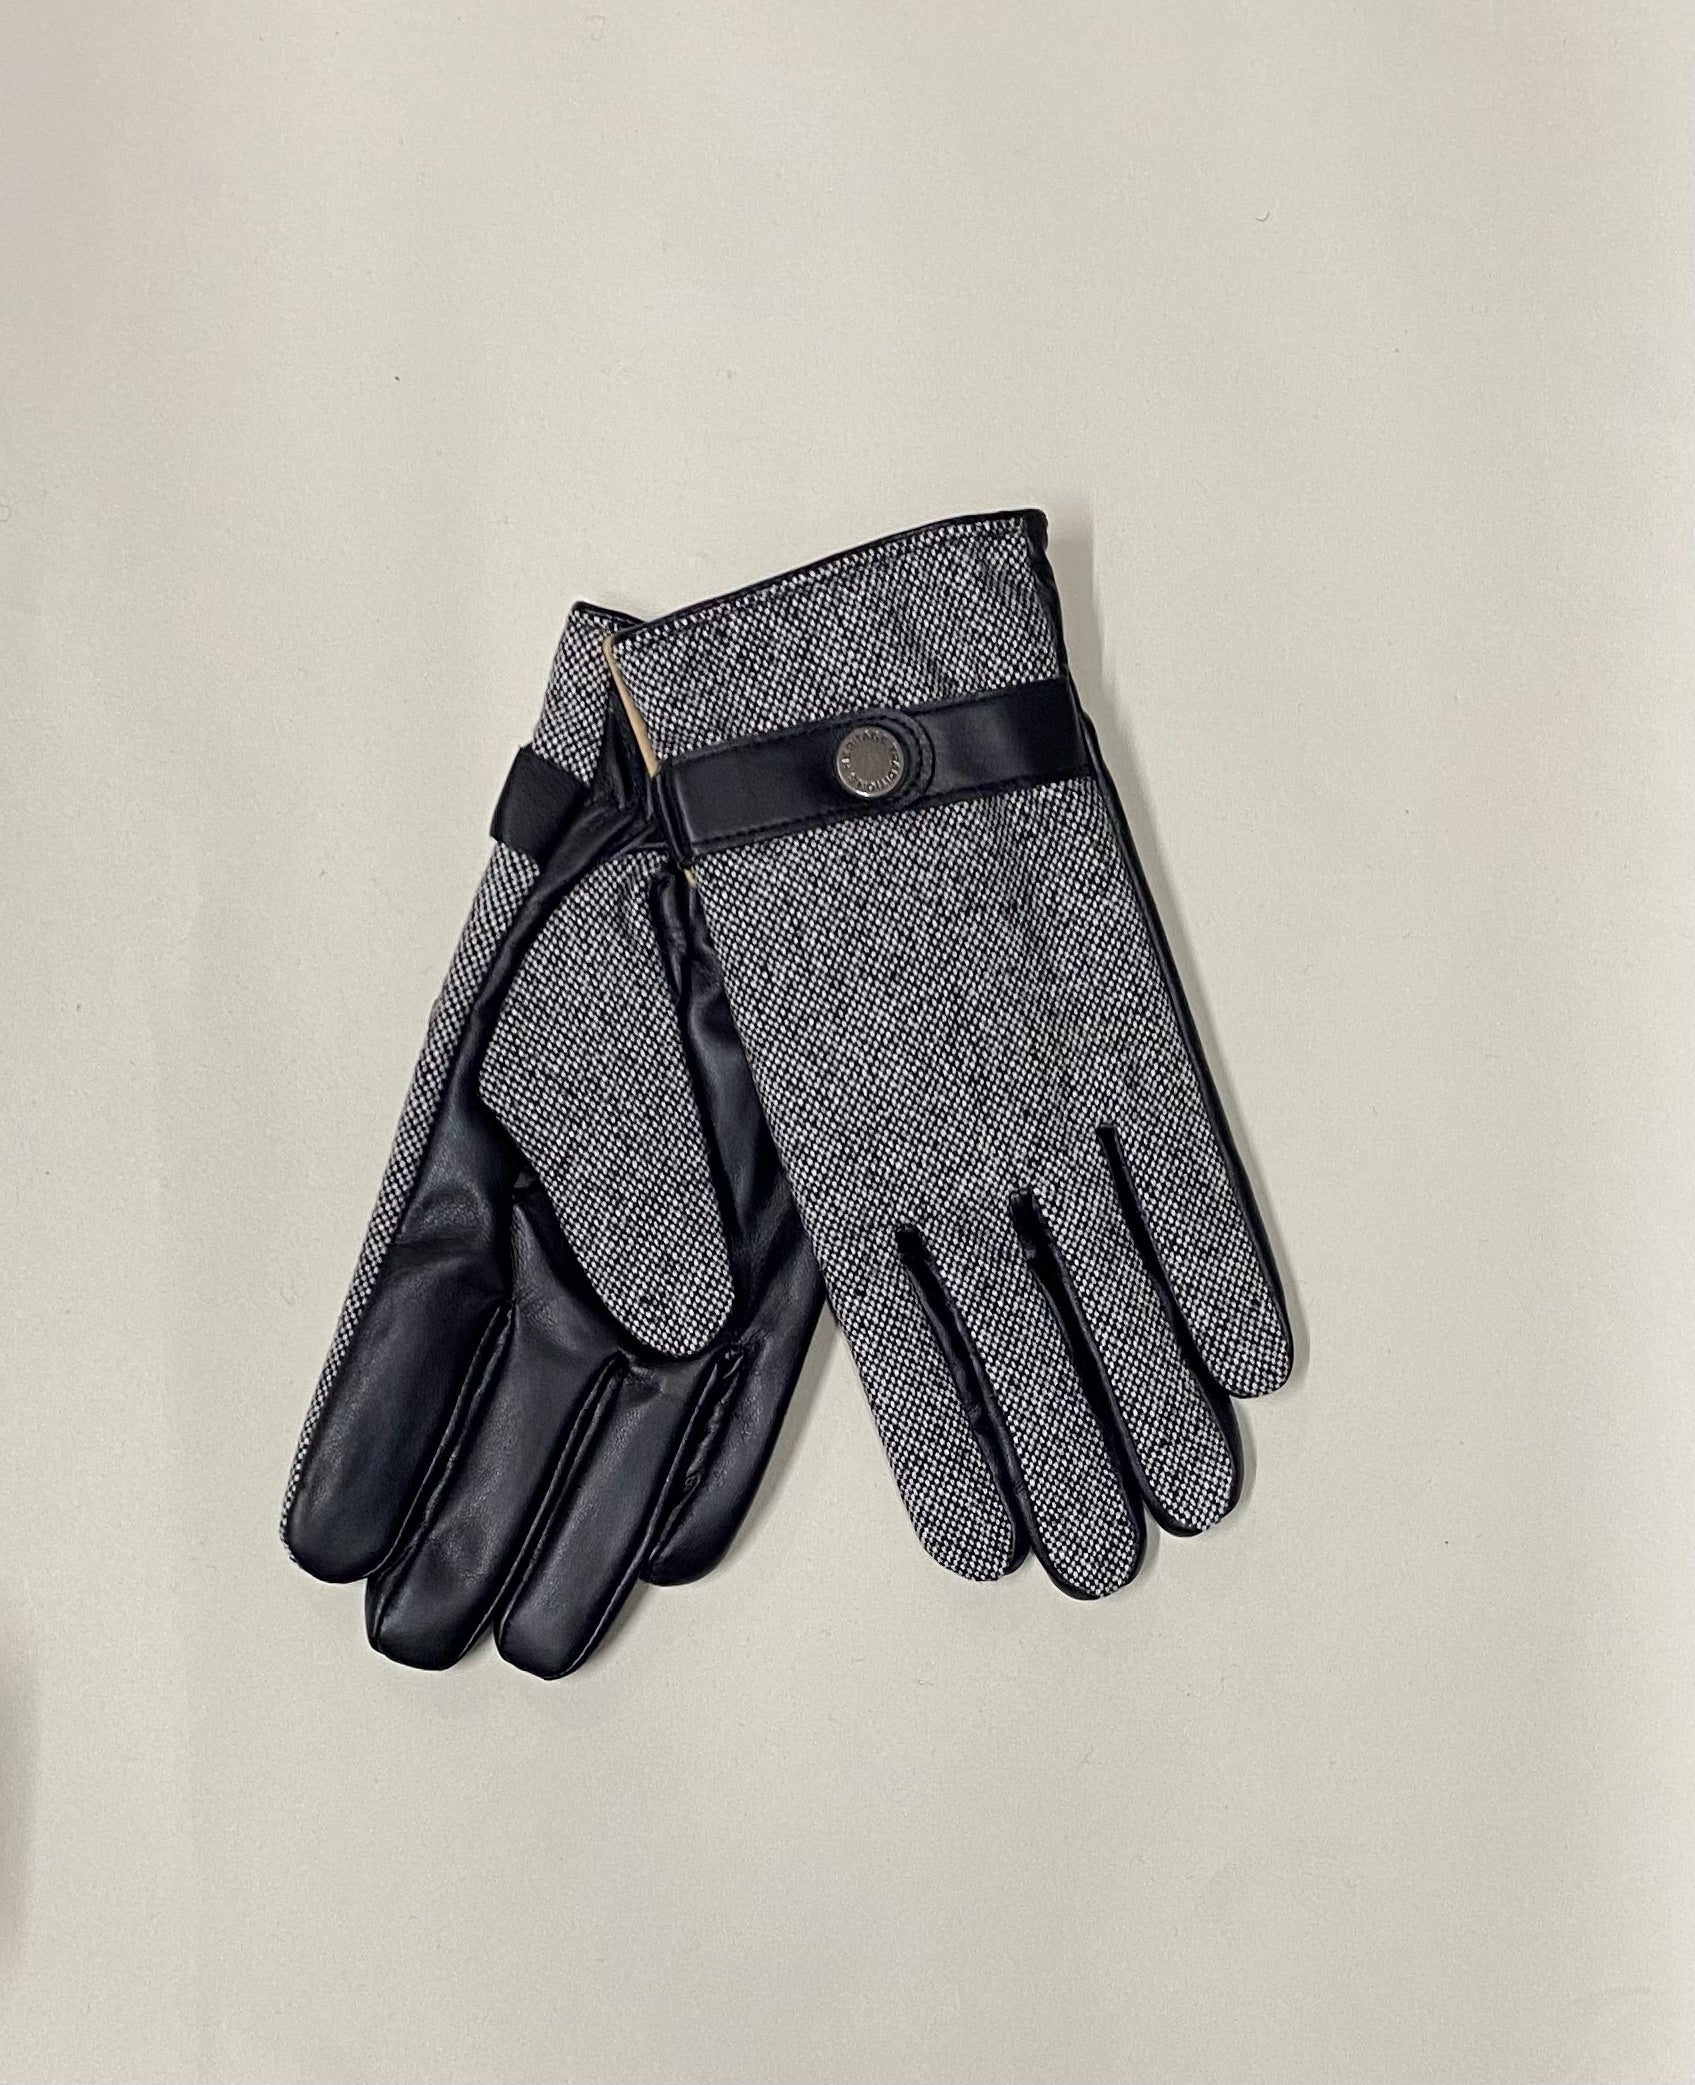 HERITAGE TRADITIONS BLACK HOUNDSTOOTH GLOVES